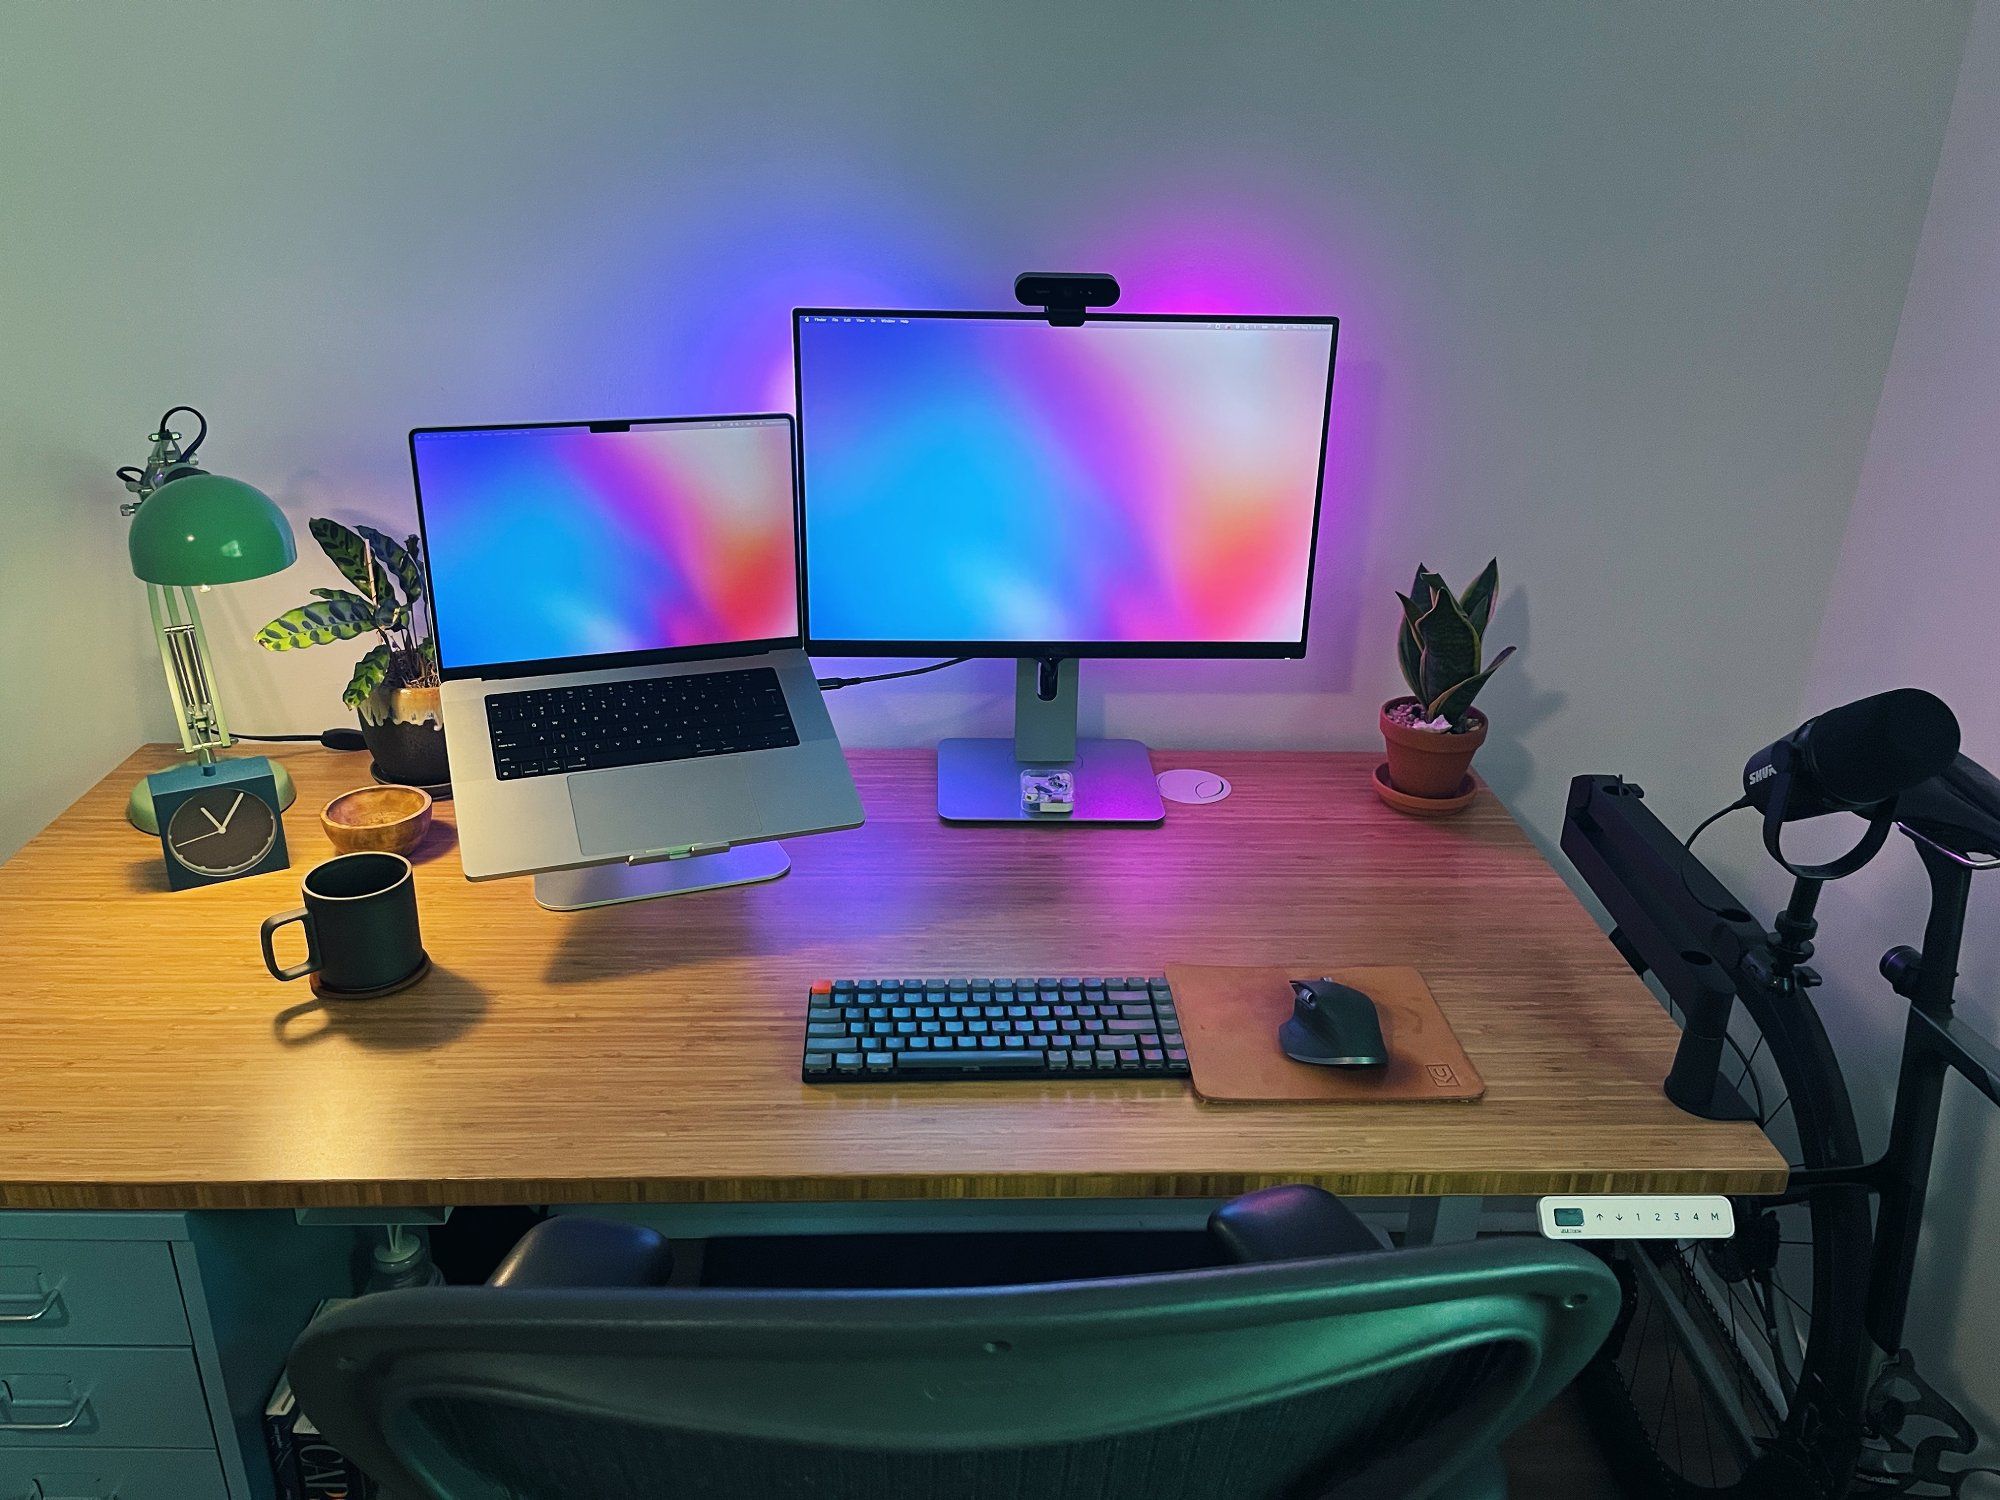 A top view of a tidy designer workspace with a monitor, laptop, mechanical keyboard, mouse, desk lamp, and two houseplants on the desk